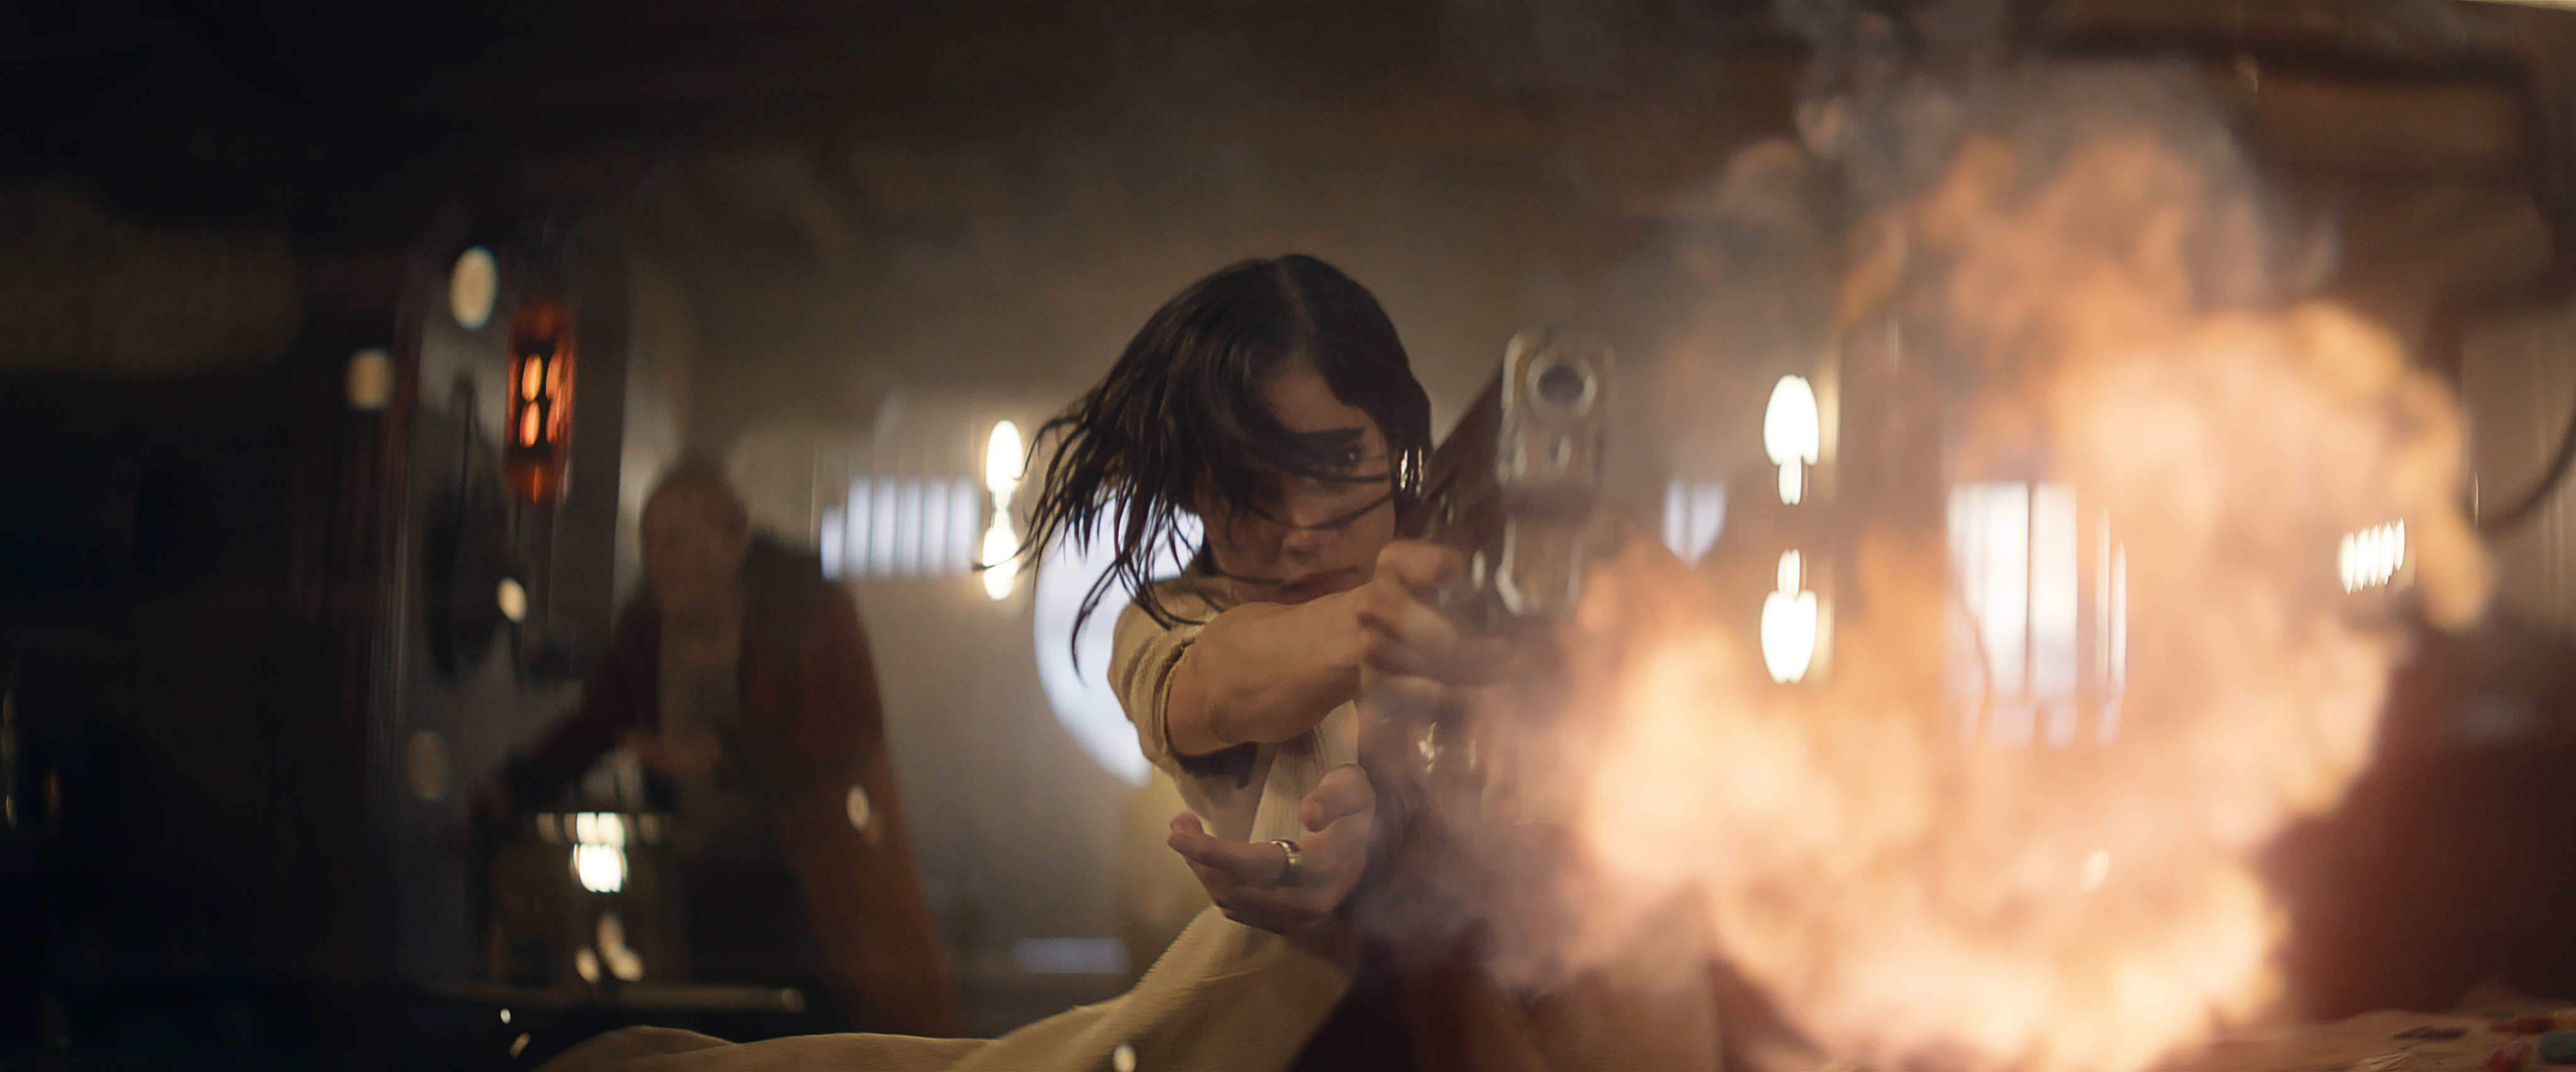 Sofia Boutella as Kora in a still from “Rebel Moon – Part One: A Child of Fire”. Photo: Netflix.